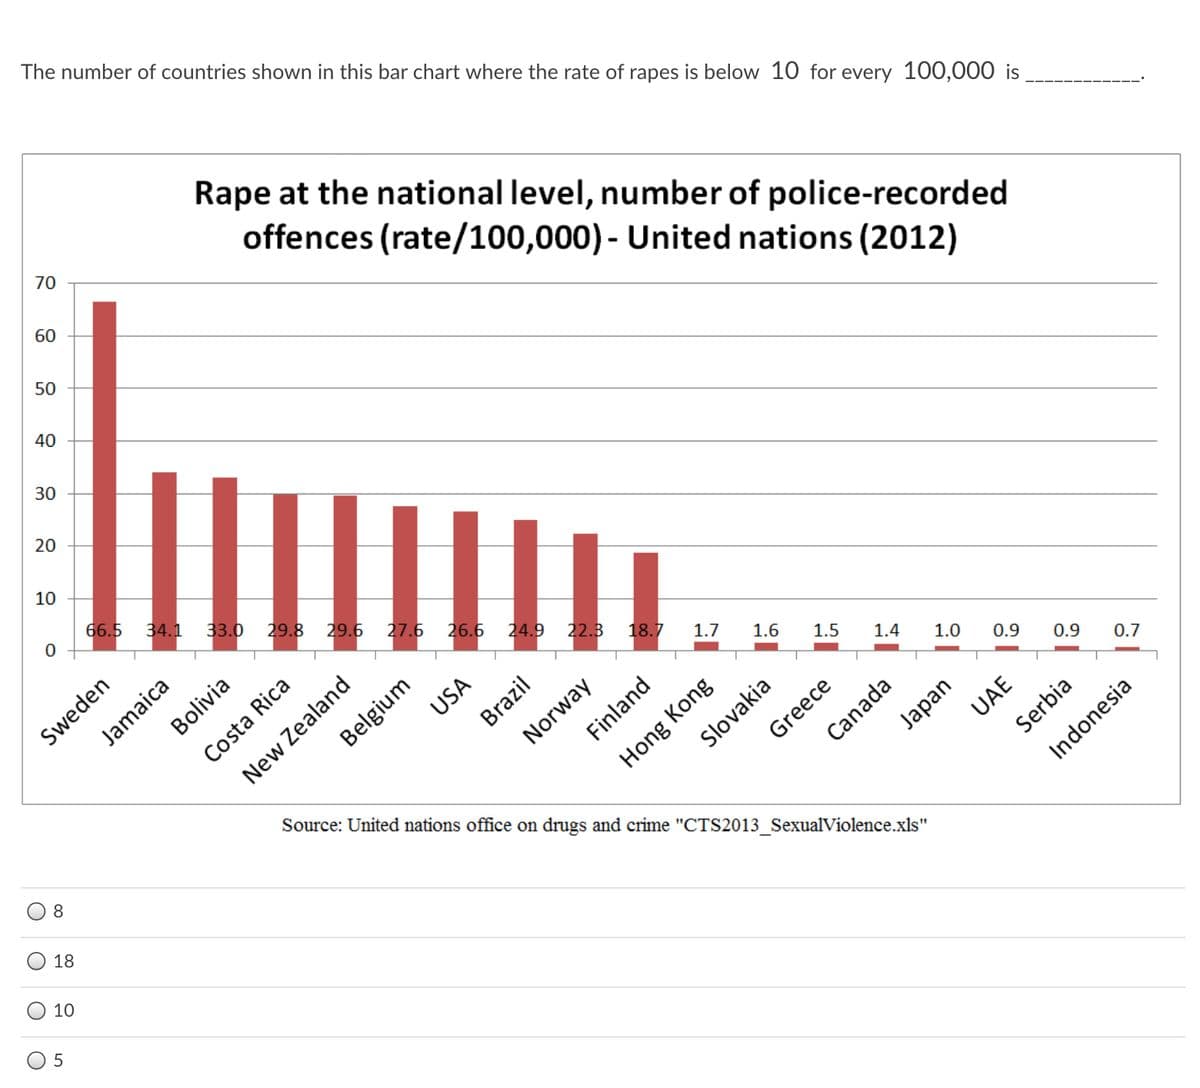 The number of countries shown in this bar chart where the rate of rapes is below 10 for every 100,000 is
Rape at the national level, number of police-recorded
70
offences (rate/100,000)- United nations (2012)
60
50
40
30
20
10
66.5 34.1
33.0
29.8
29.6 27.6
Jamaica
Bolivia
Sweden
26.6
24.9 22.3
Belgium
USA
18.7
Costa Rica
1.7
1.6
1.5
Finland
Source: United nations office on drugs and crime "CTS2013 SexualViolence.xls"
1.4
Hong Kong
Slovakia
Norway
1.0
0.9
8.
0.9
0.7
Japan
UAE
Greece
18
Canada
Serbia
10
Indonesia
New Zealand
Brazil
